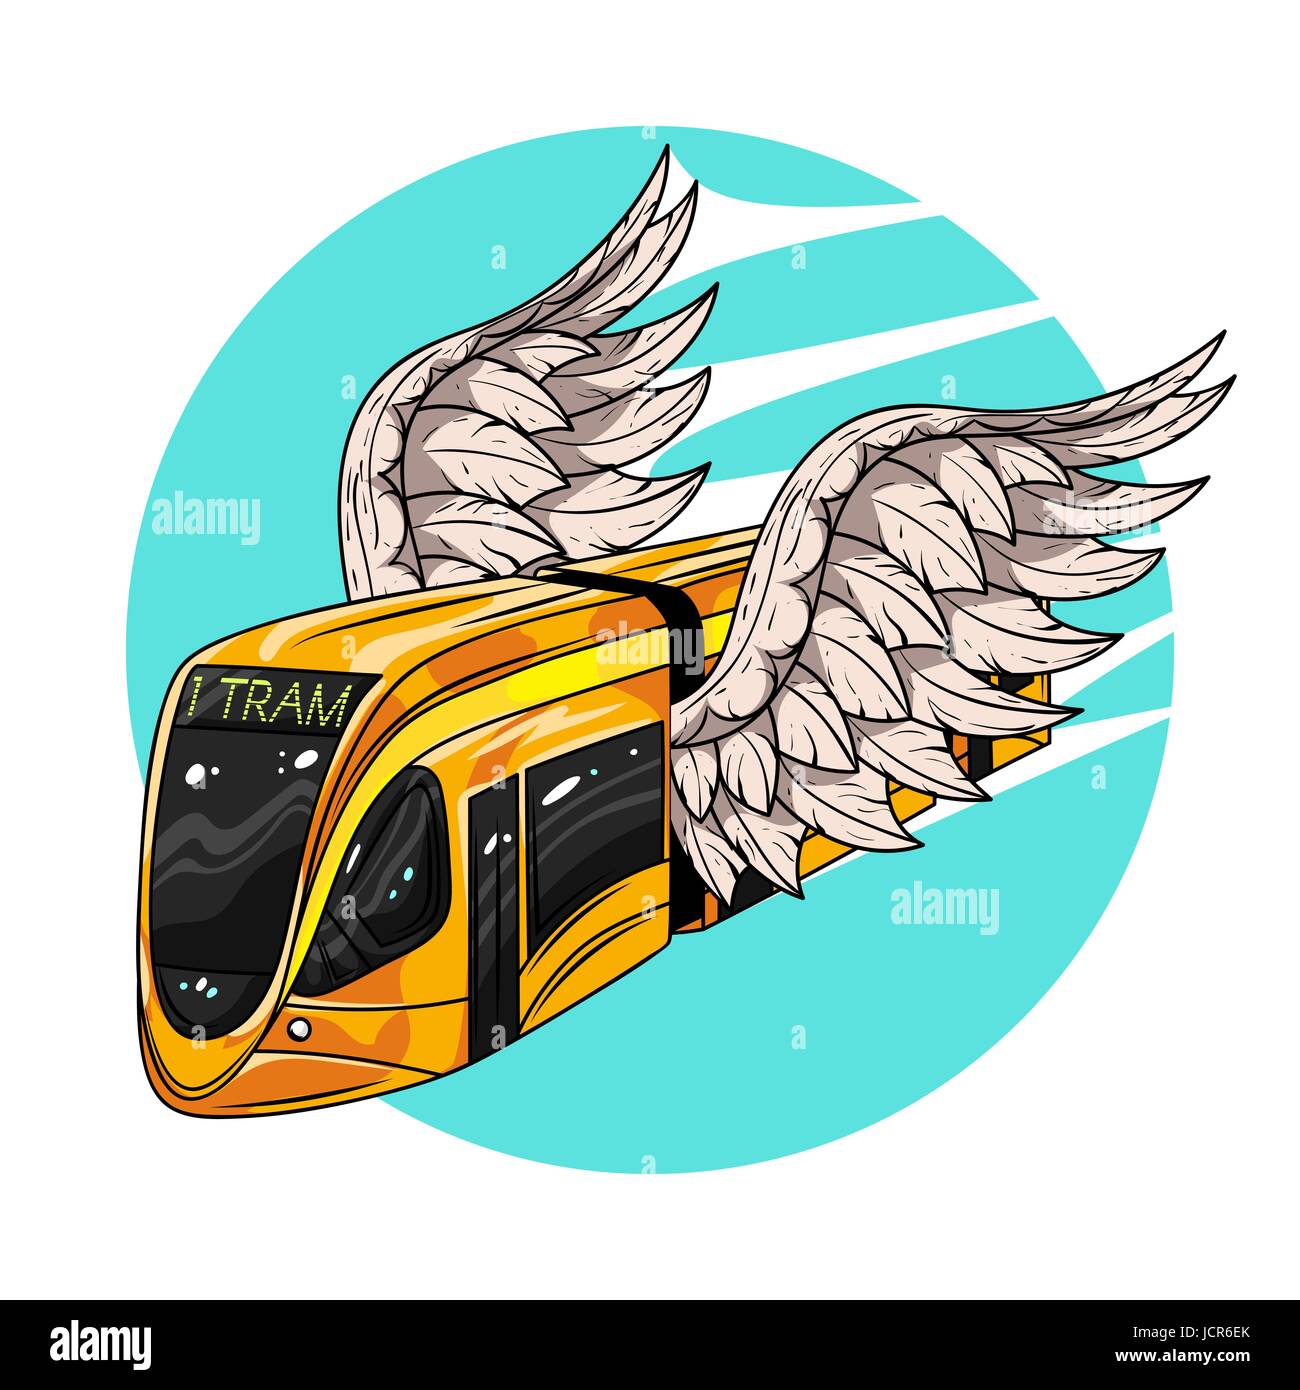 Vector hand drawn illustration of modern tram car with wings. Concept of fast transport. Illustration for print, web. Stock Vector